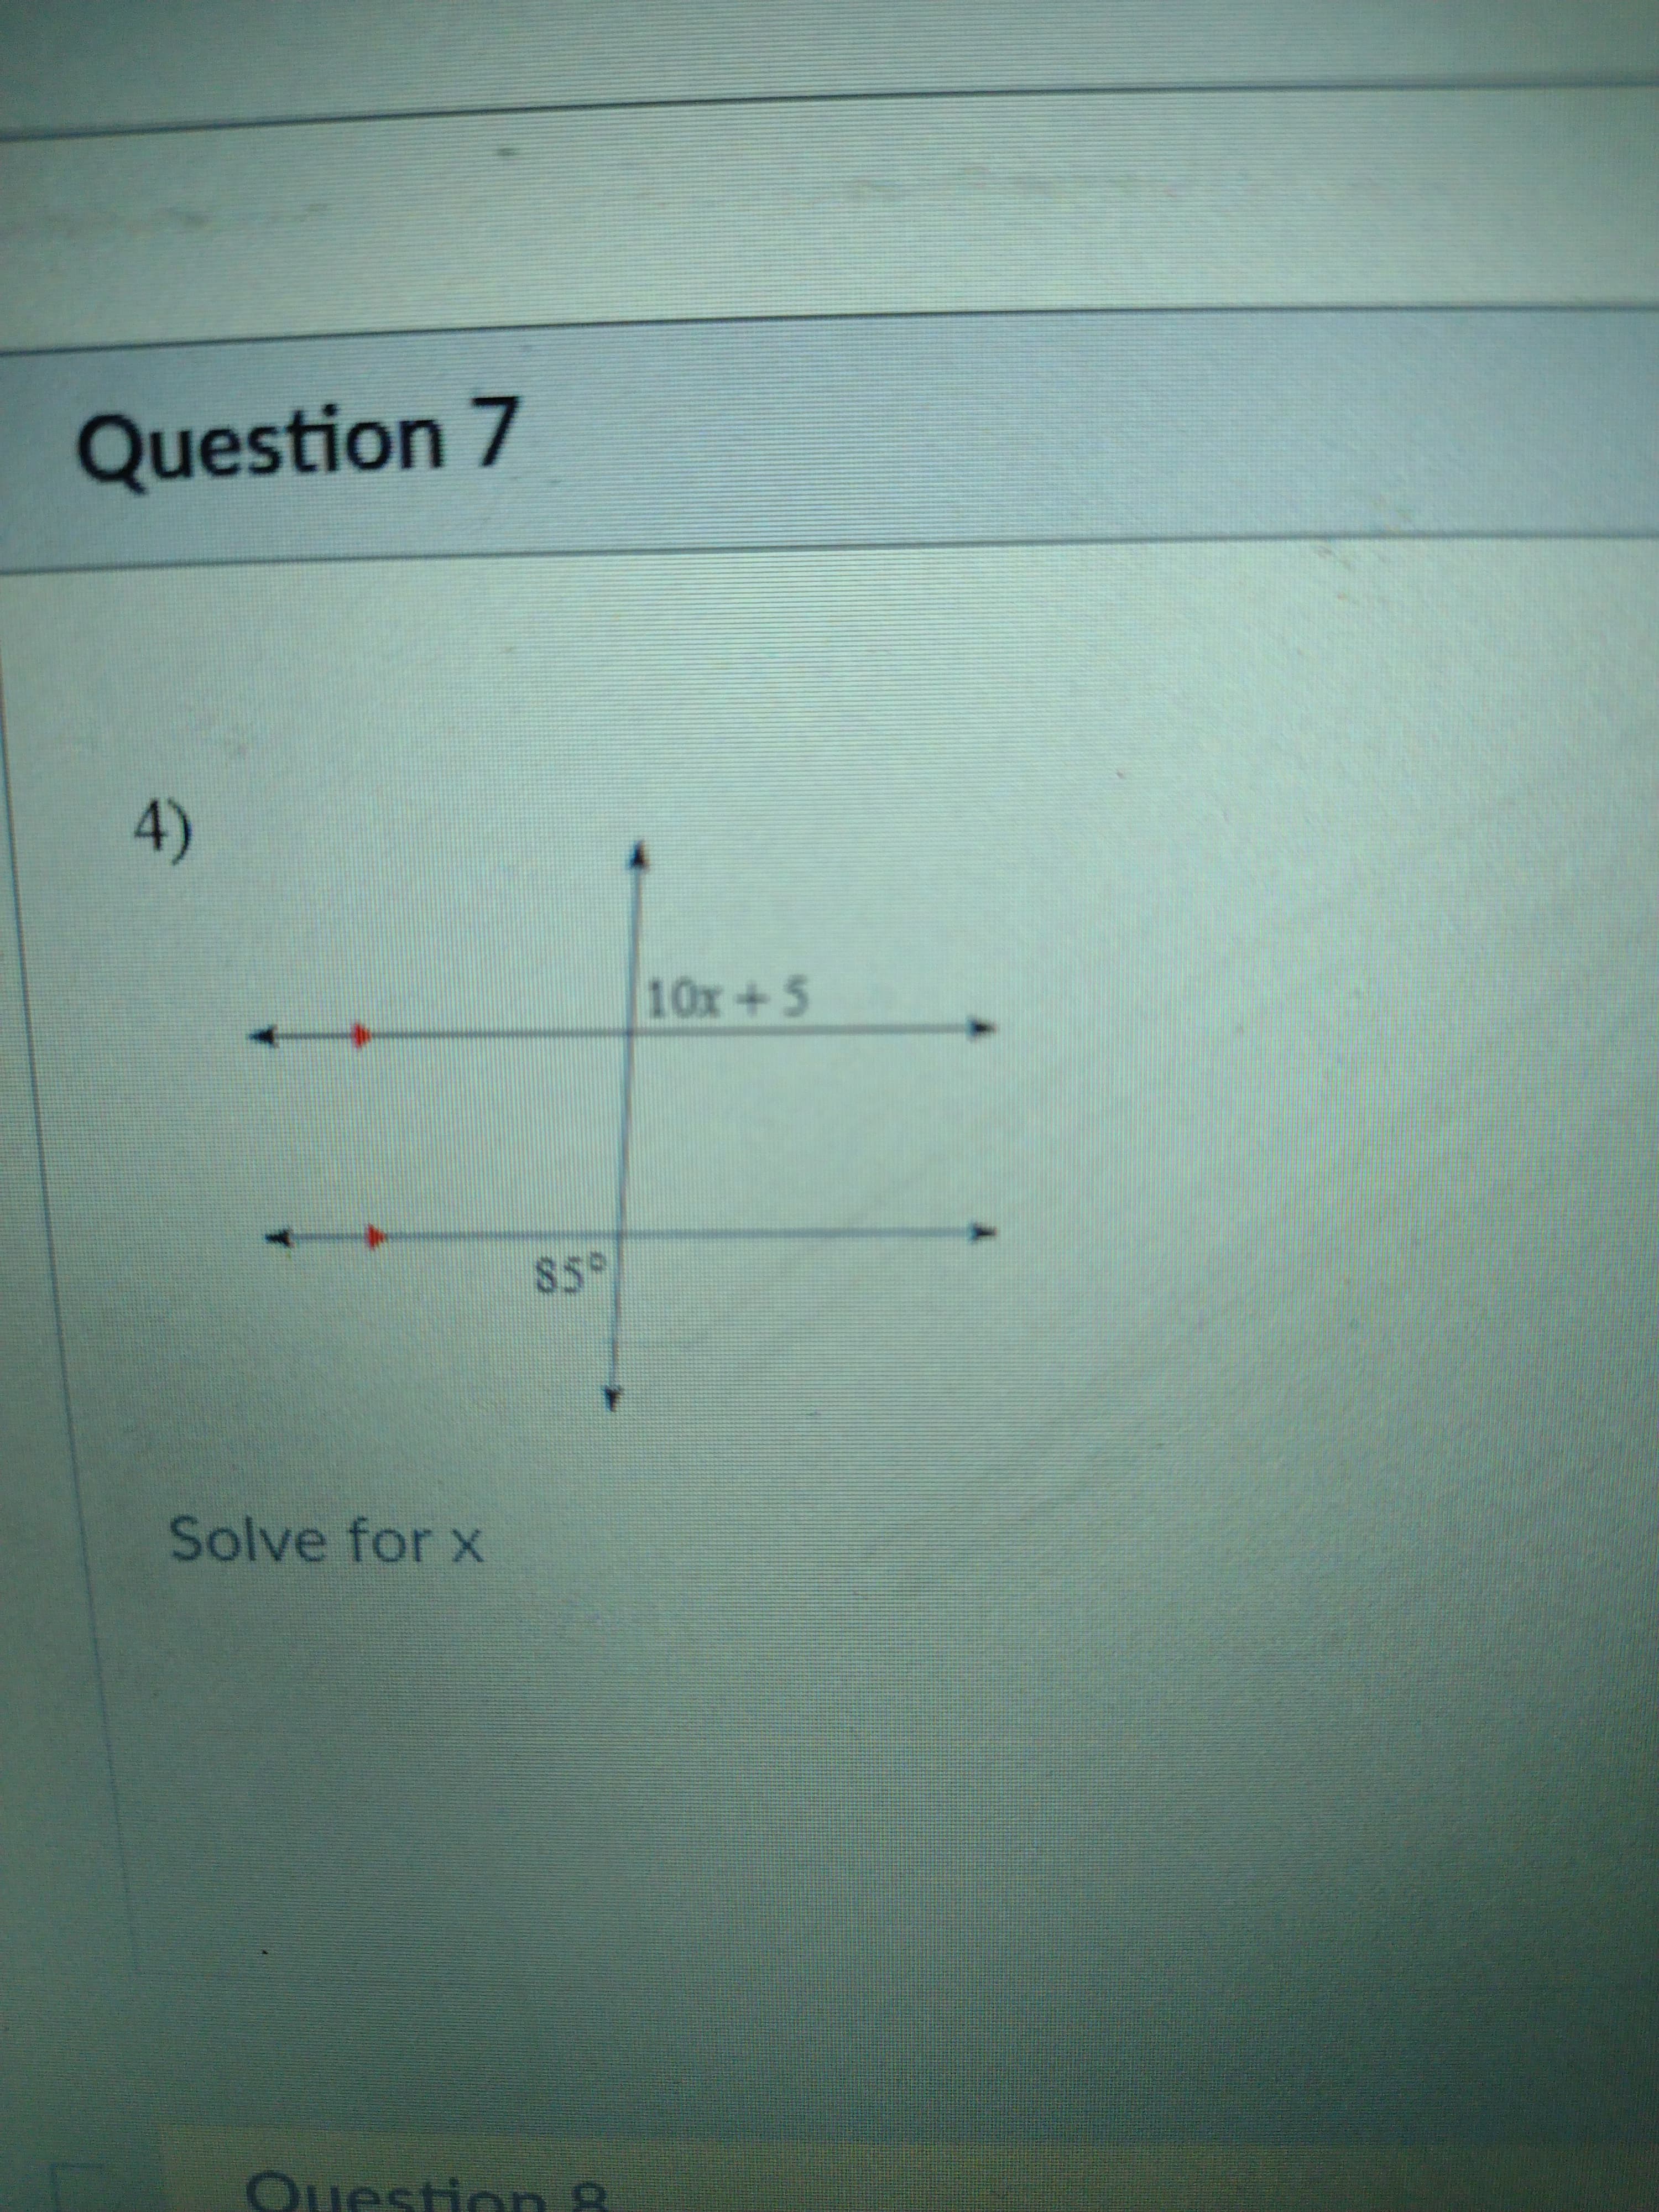 Question 7
4)
10x+5
Solve for x
Ouestion 8
